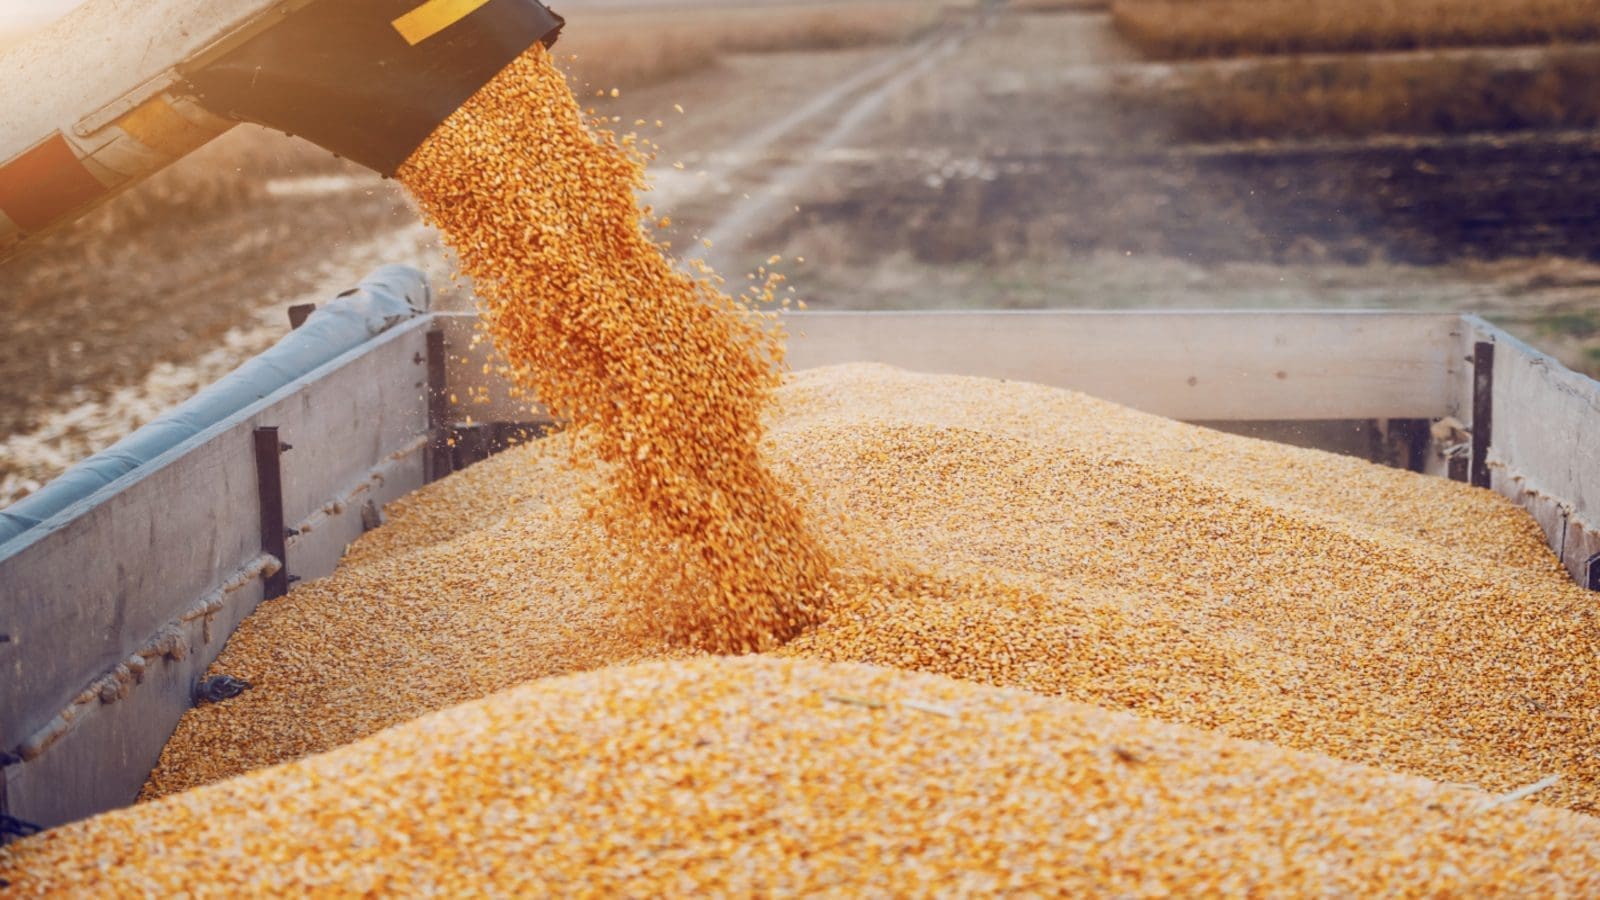 China to import more feed grains as demand from an expanding poultry sector surges